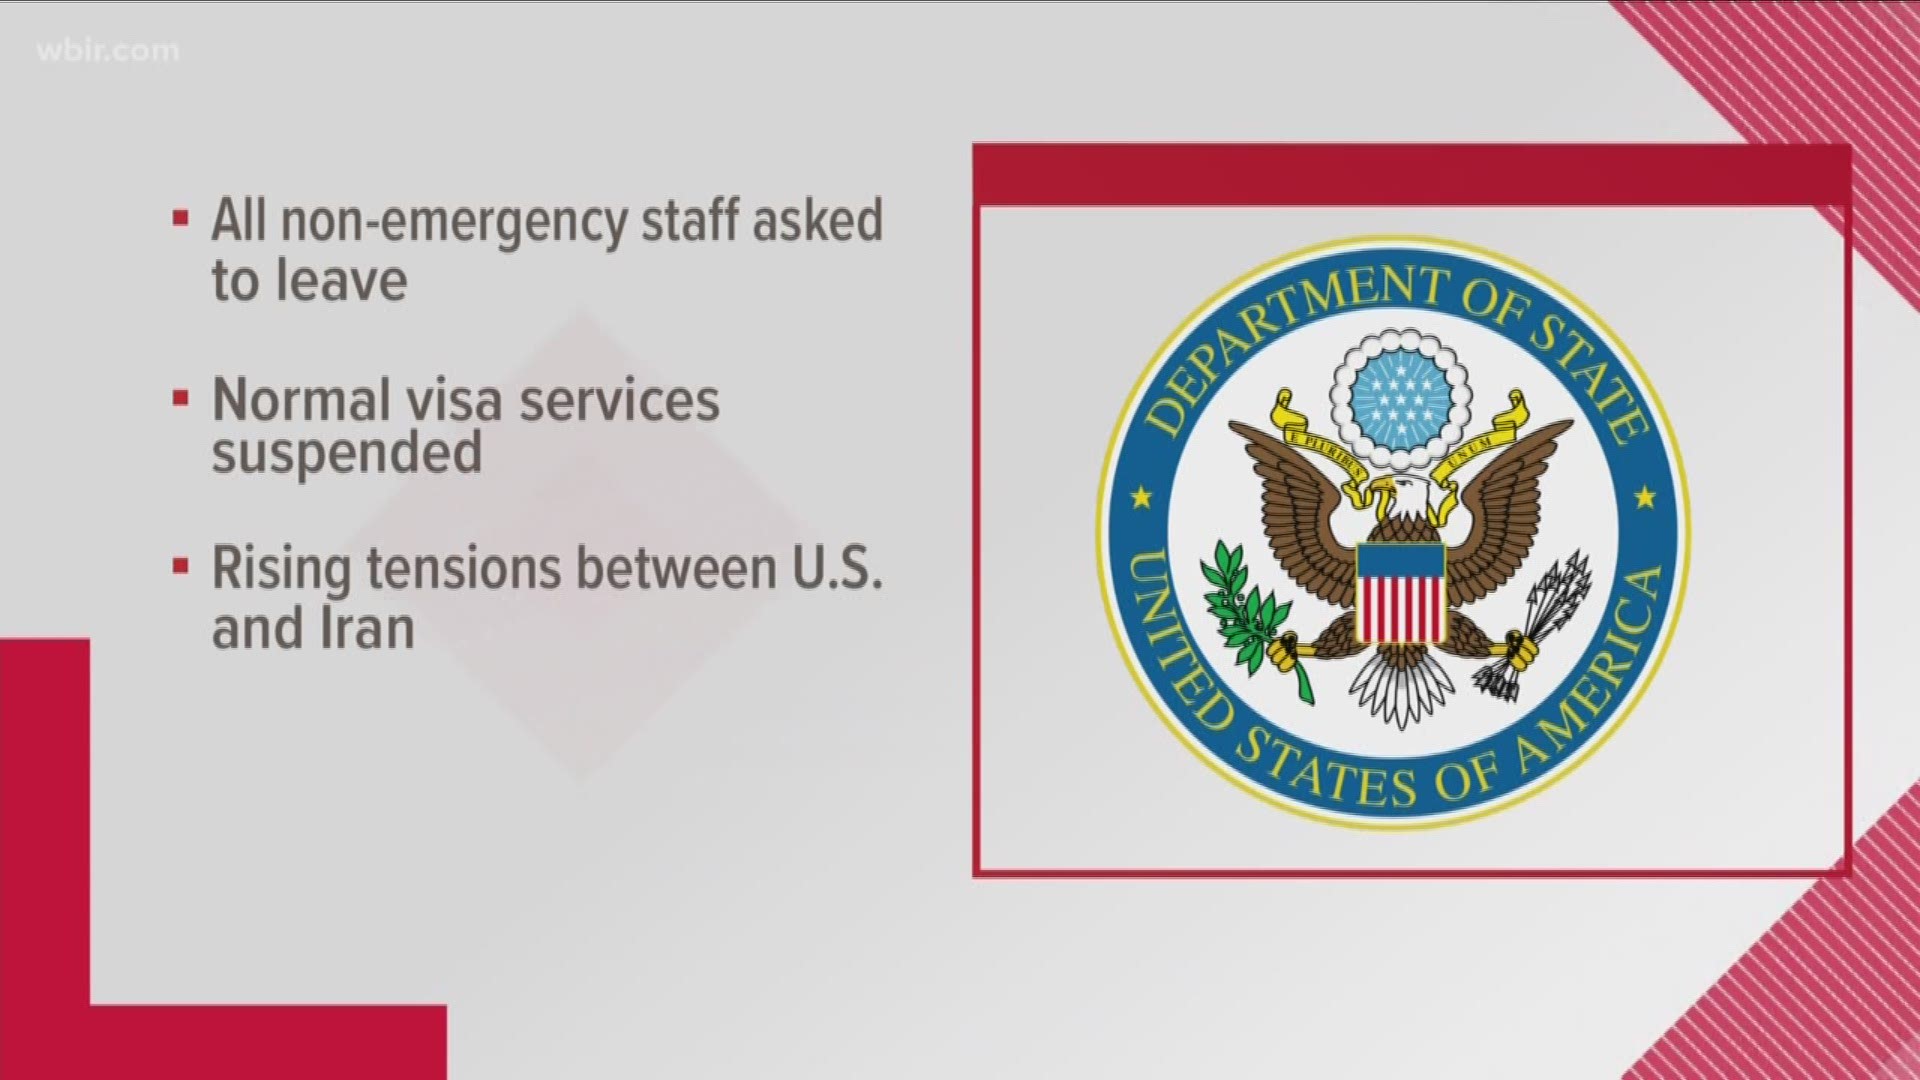 The U.S. Embassy has ordered all non-emergency government staff to leave Iraq right away. Normal visa services there have been suspended. It comes as tensions are rising between the U.S. and nearby Iran.